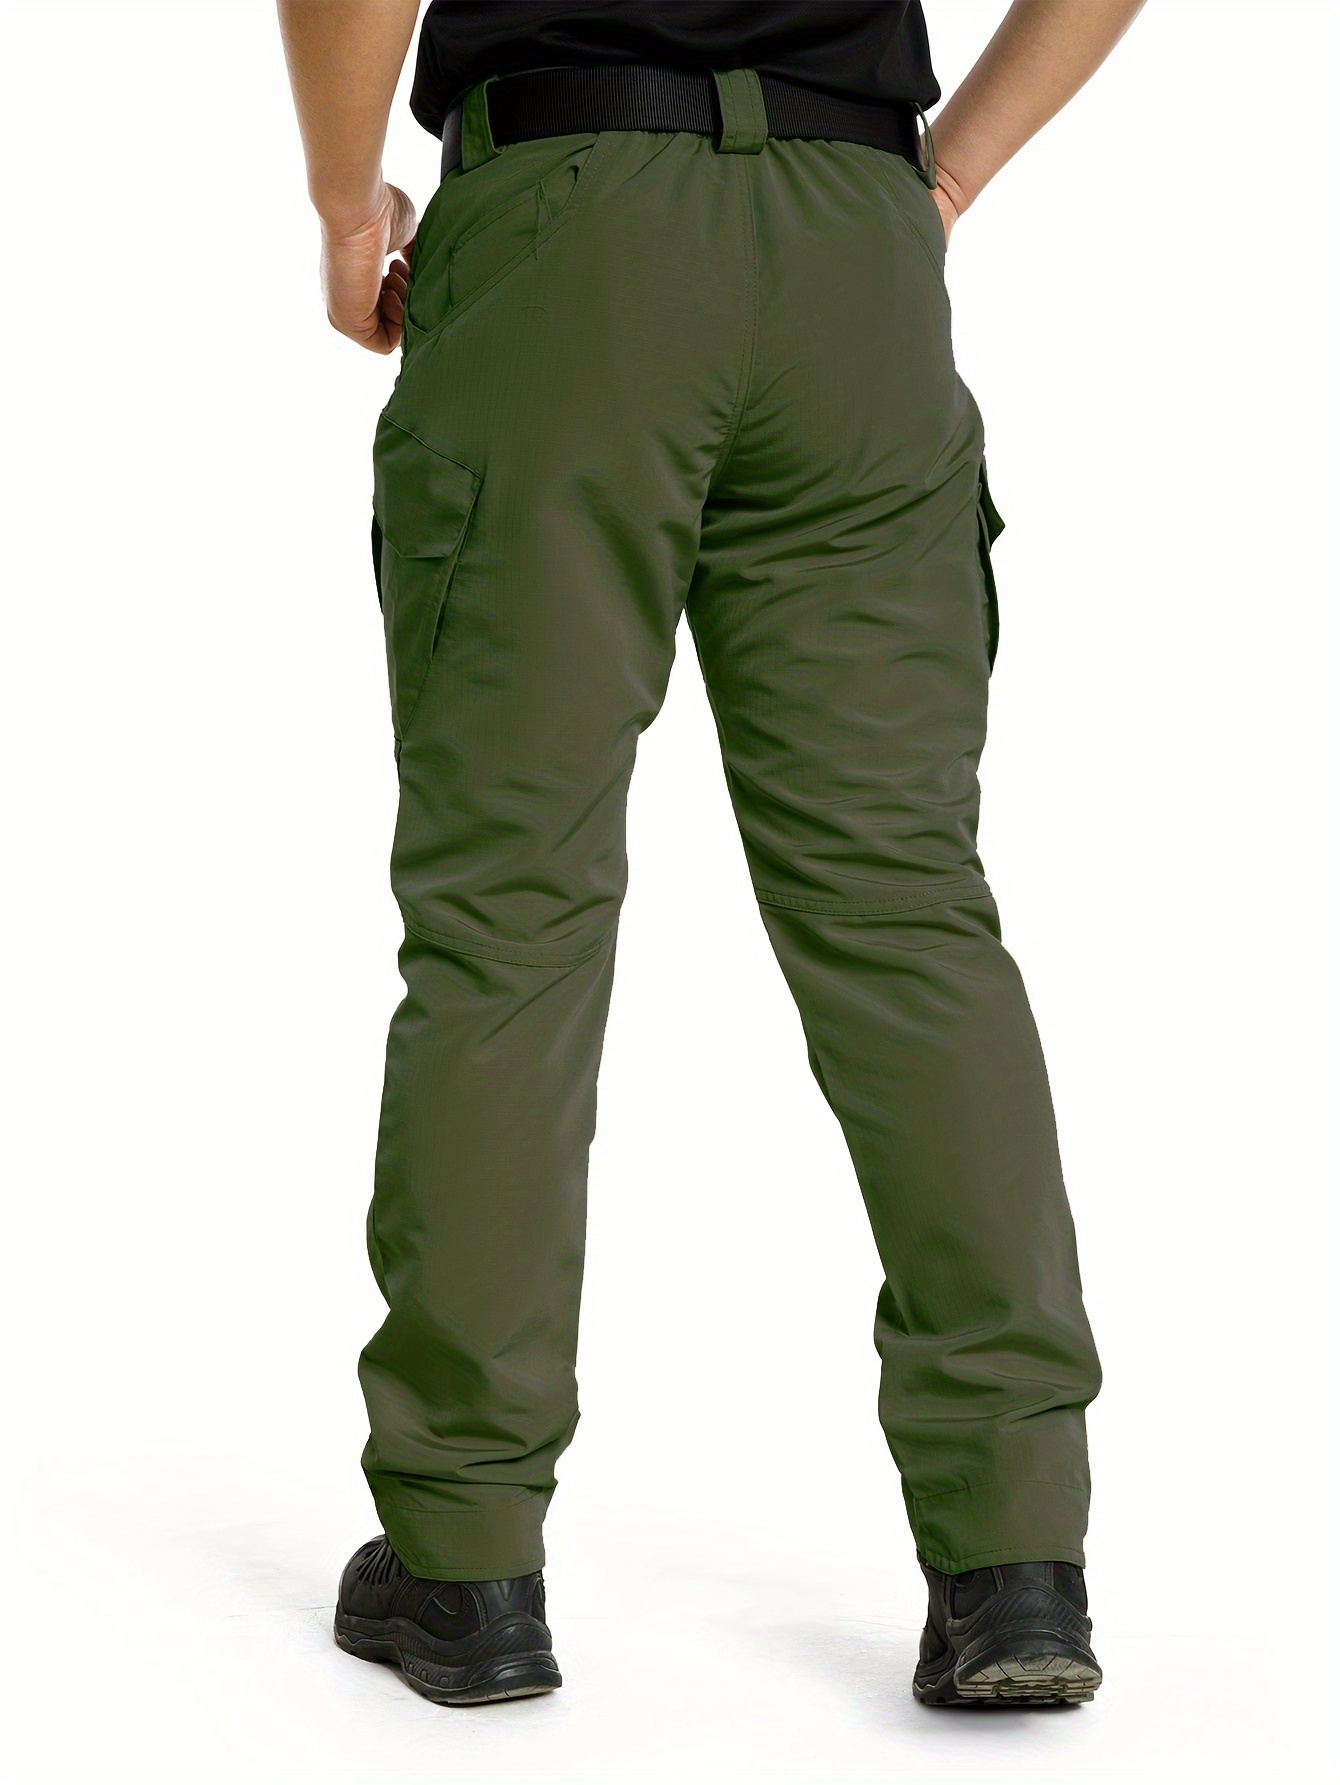 Cargo pants for men Trousers Work Wear Combat Cargo 6 Pocket Full Pants 511  Tactical Pants Outdoor sports pants Army Green L 